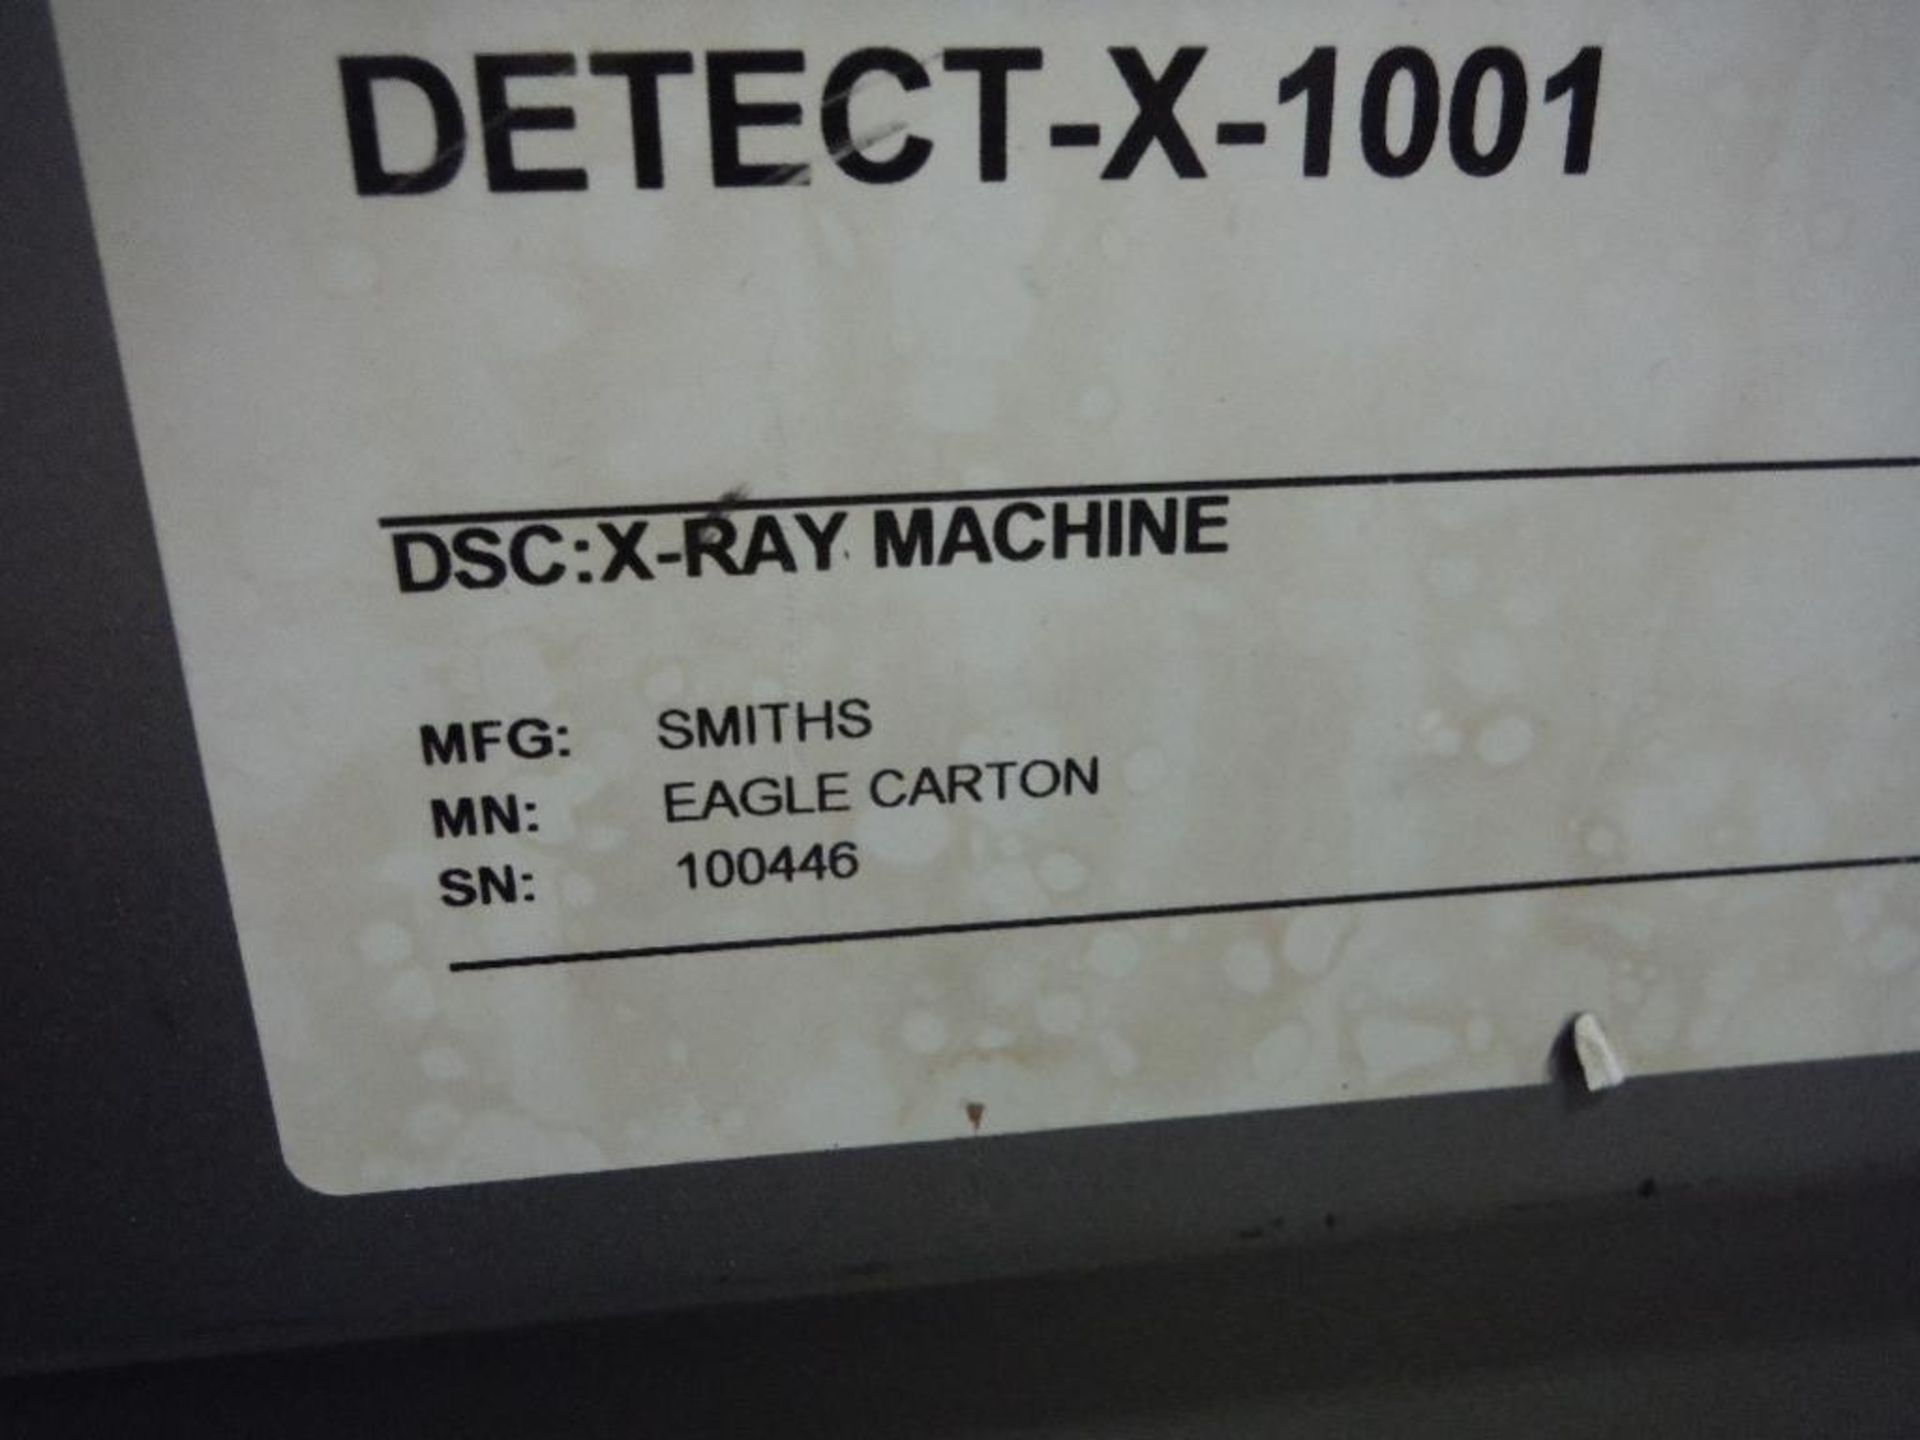 2005 Smiths x-ray machine, Model Eagle Carton, SN 100446, 25 in. wide x 16 in. tall aperture, 130 in - Image 16 of 16